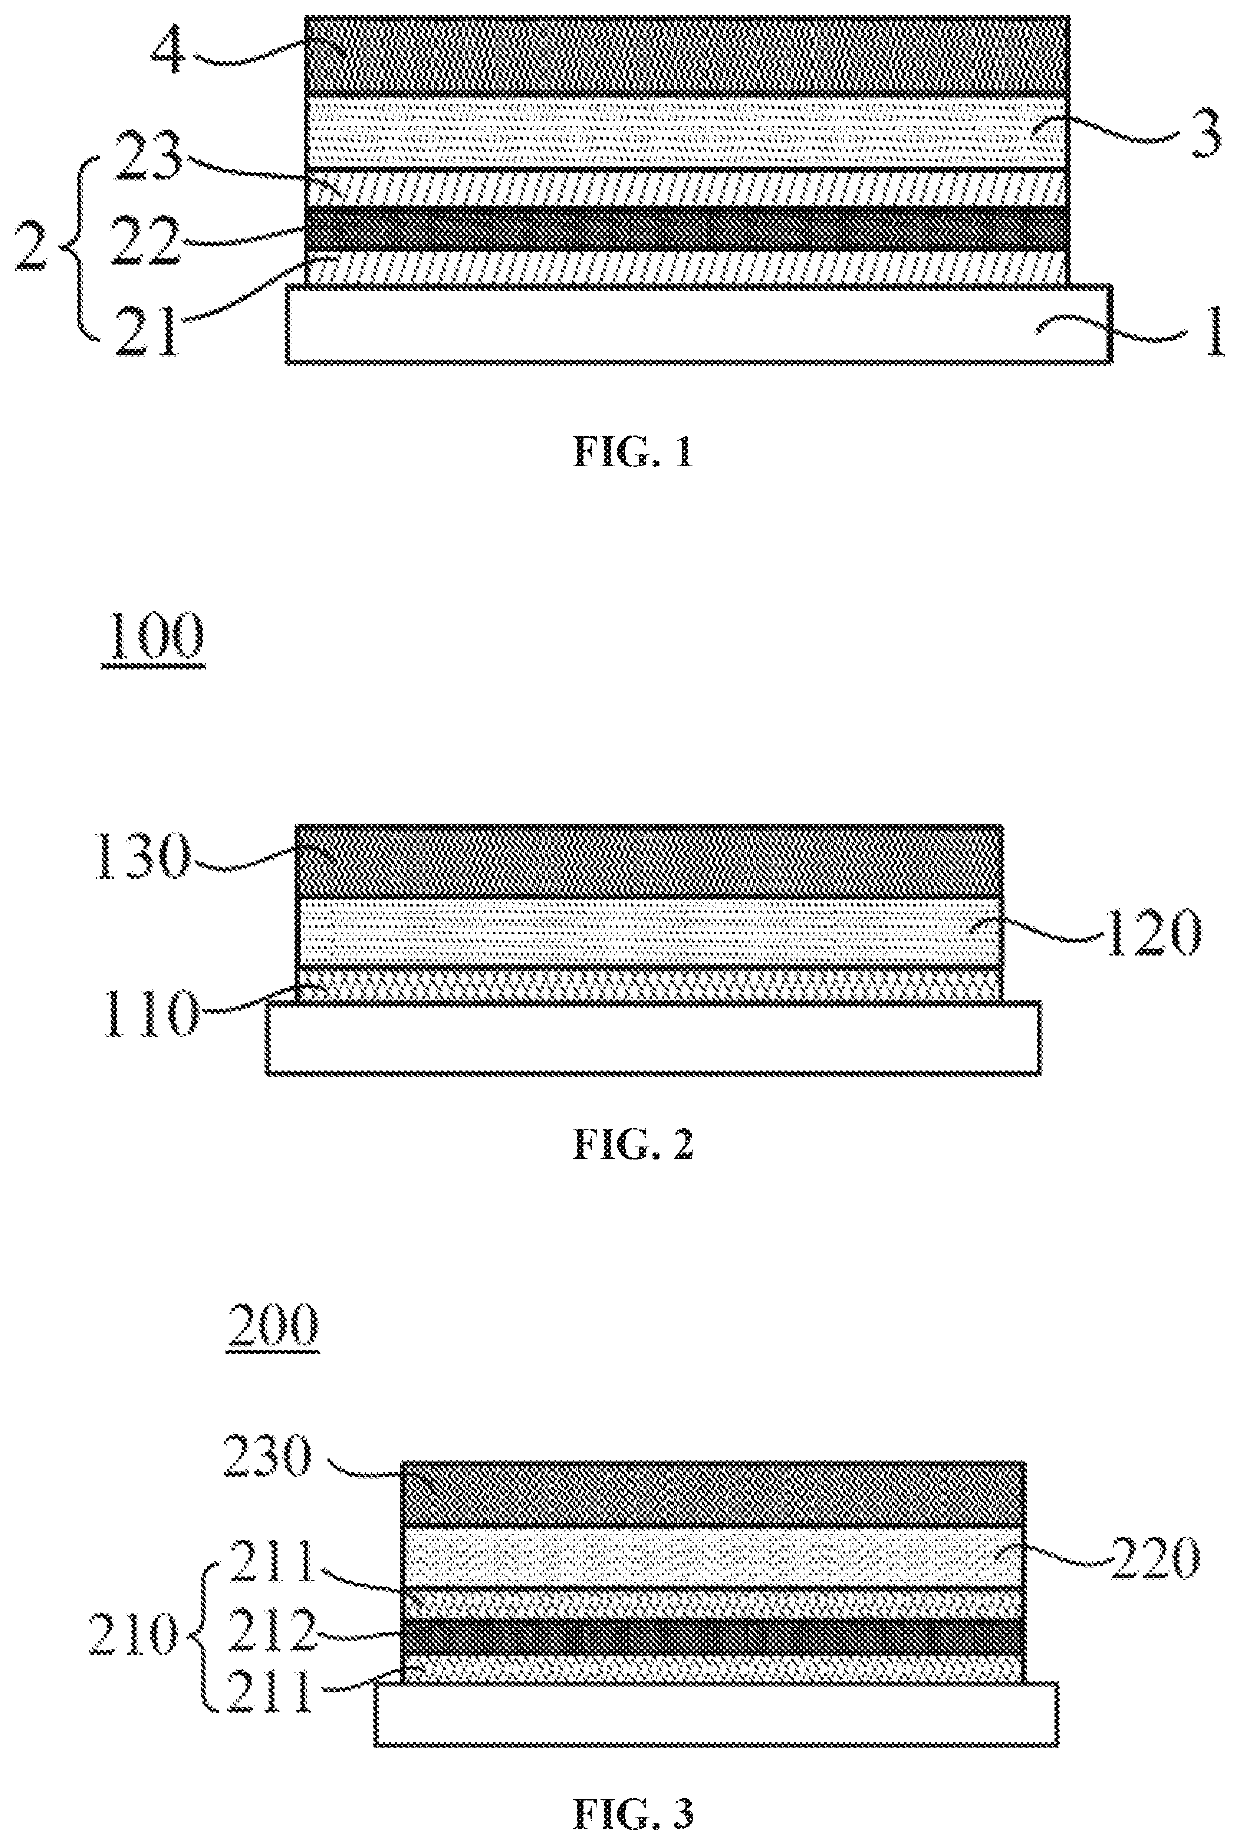 Organic electroluminescent device, method of preparing conductive film material, and display panel